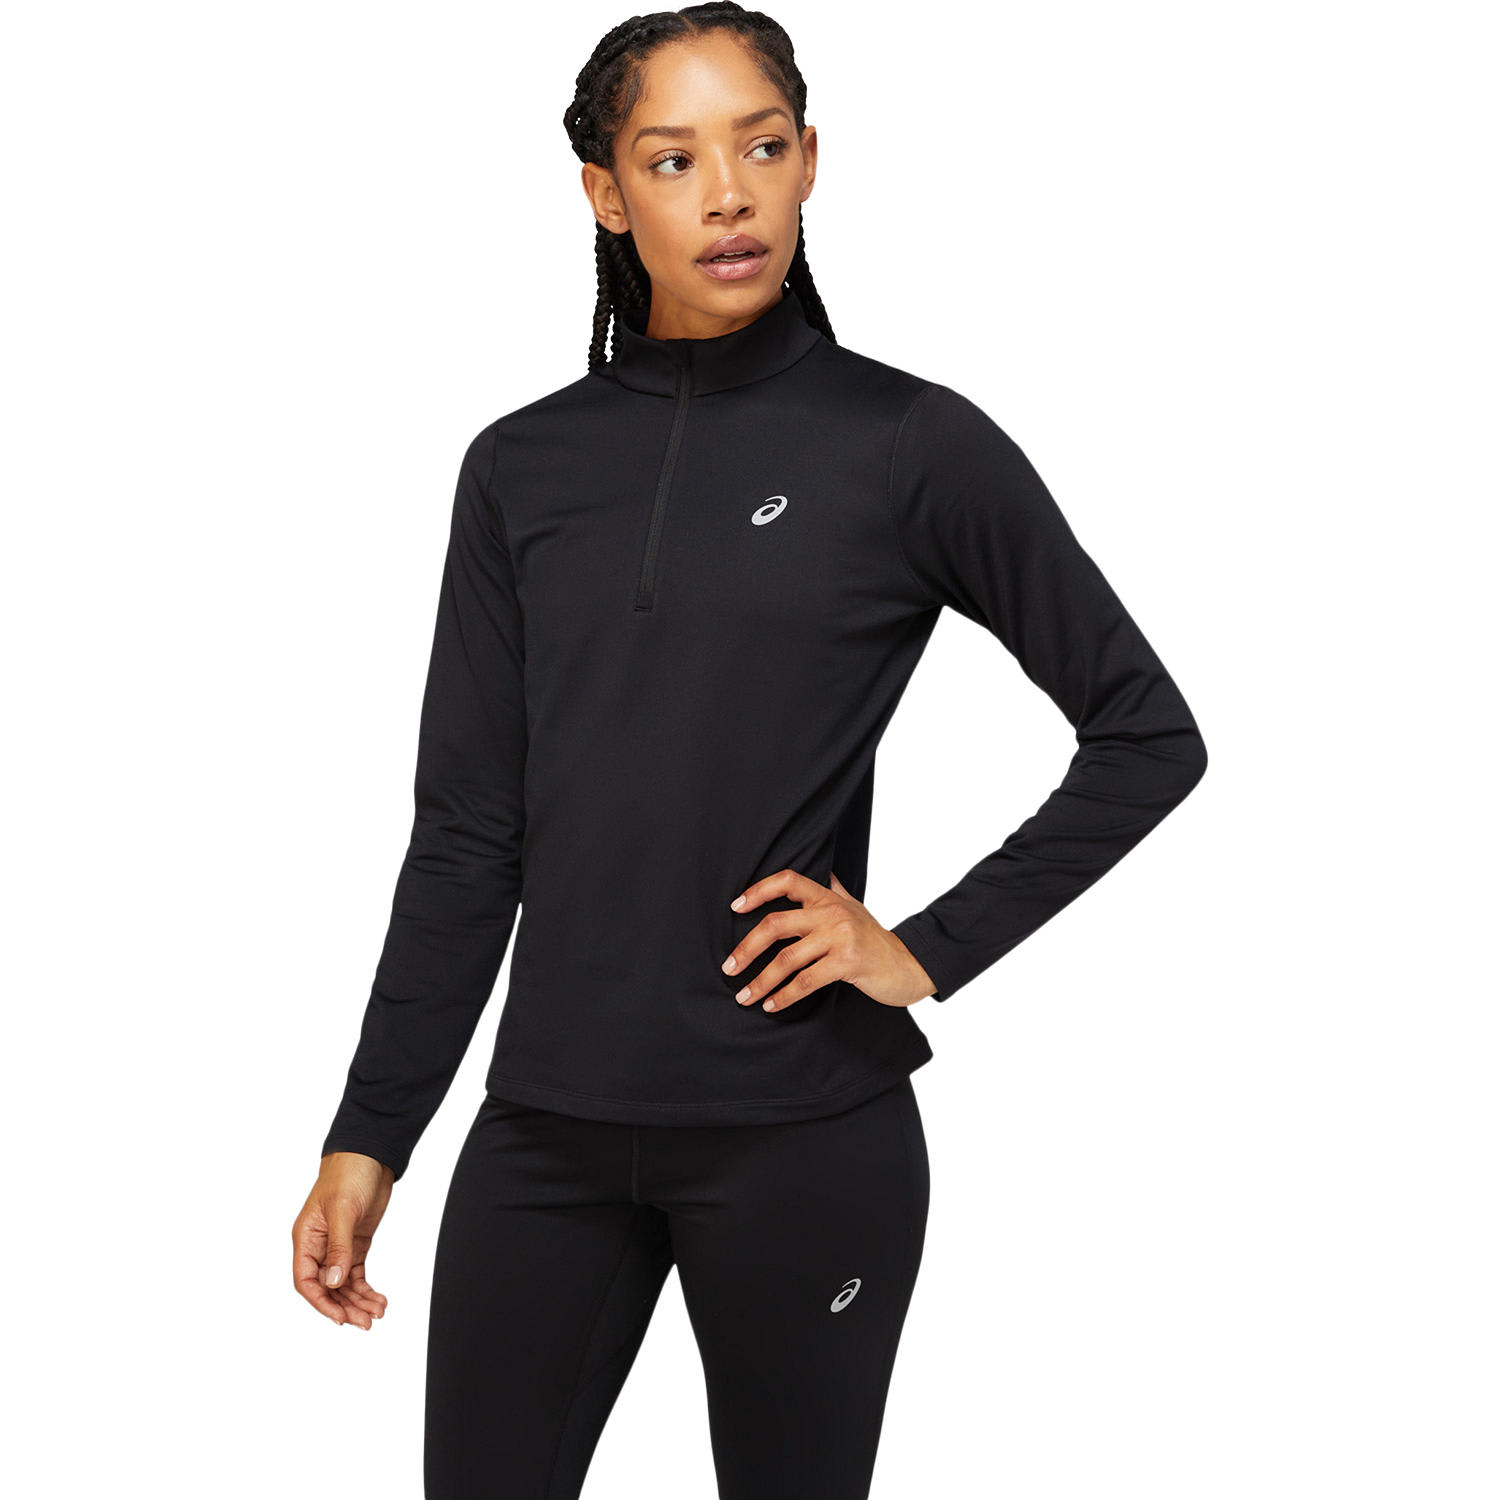 Buy Asics Women's Core LS 1/2 Zip Winter Top from Outnorth